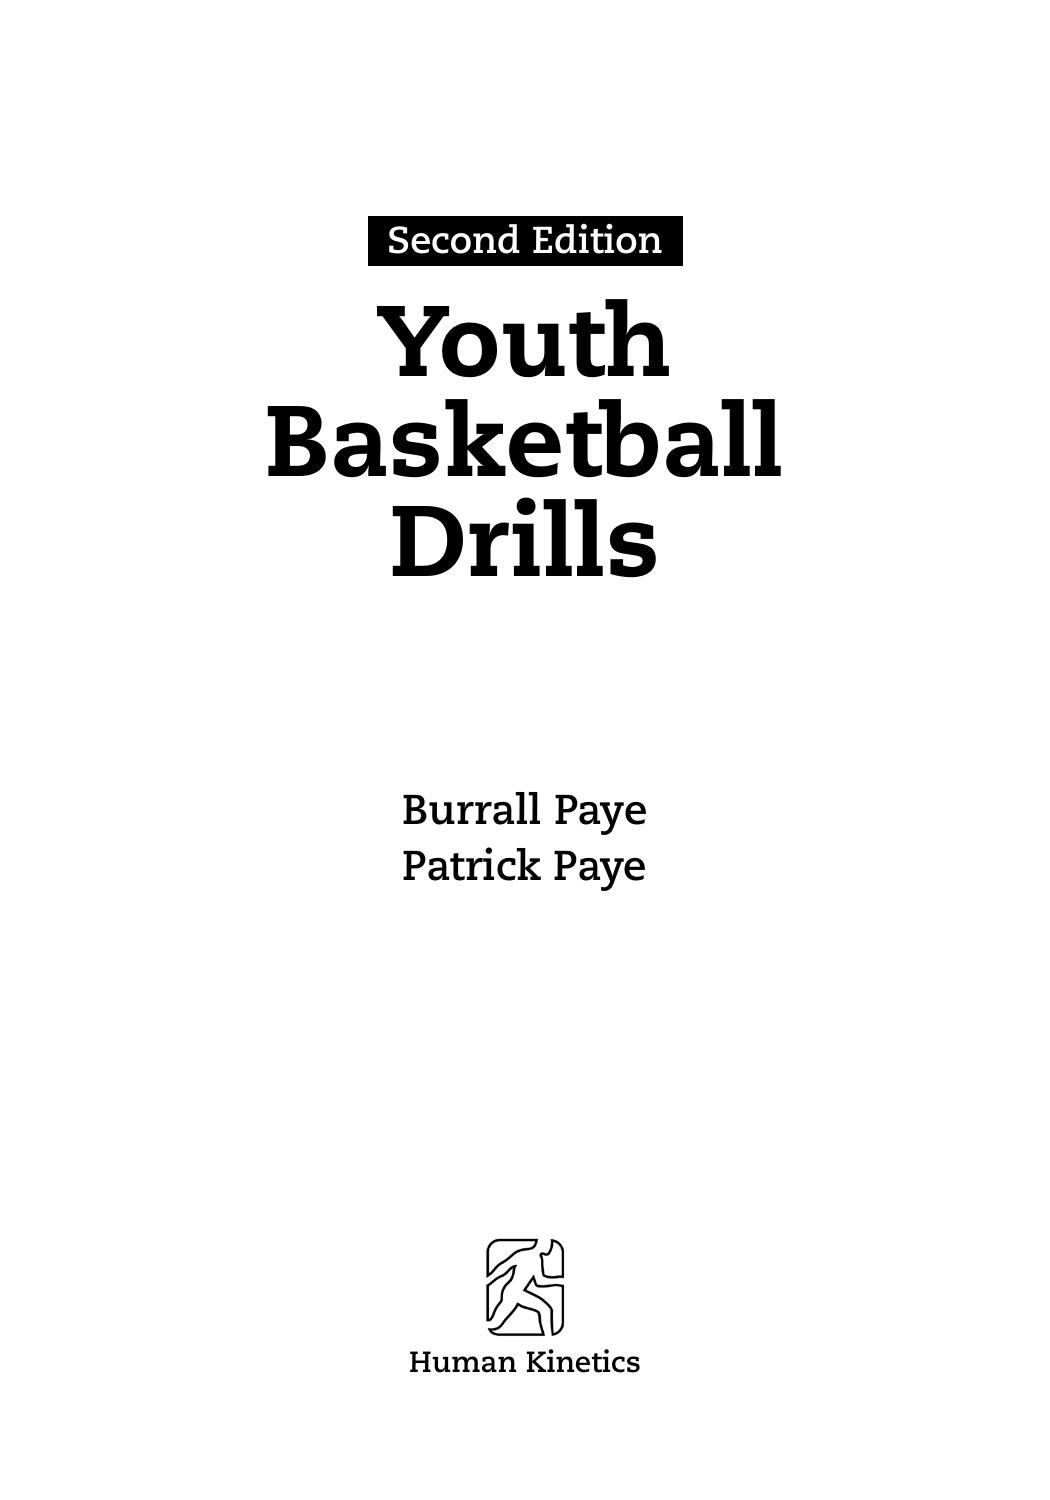 Youth Basketball Drills, Second Edition